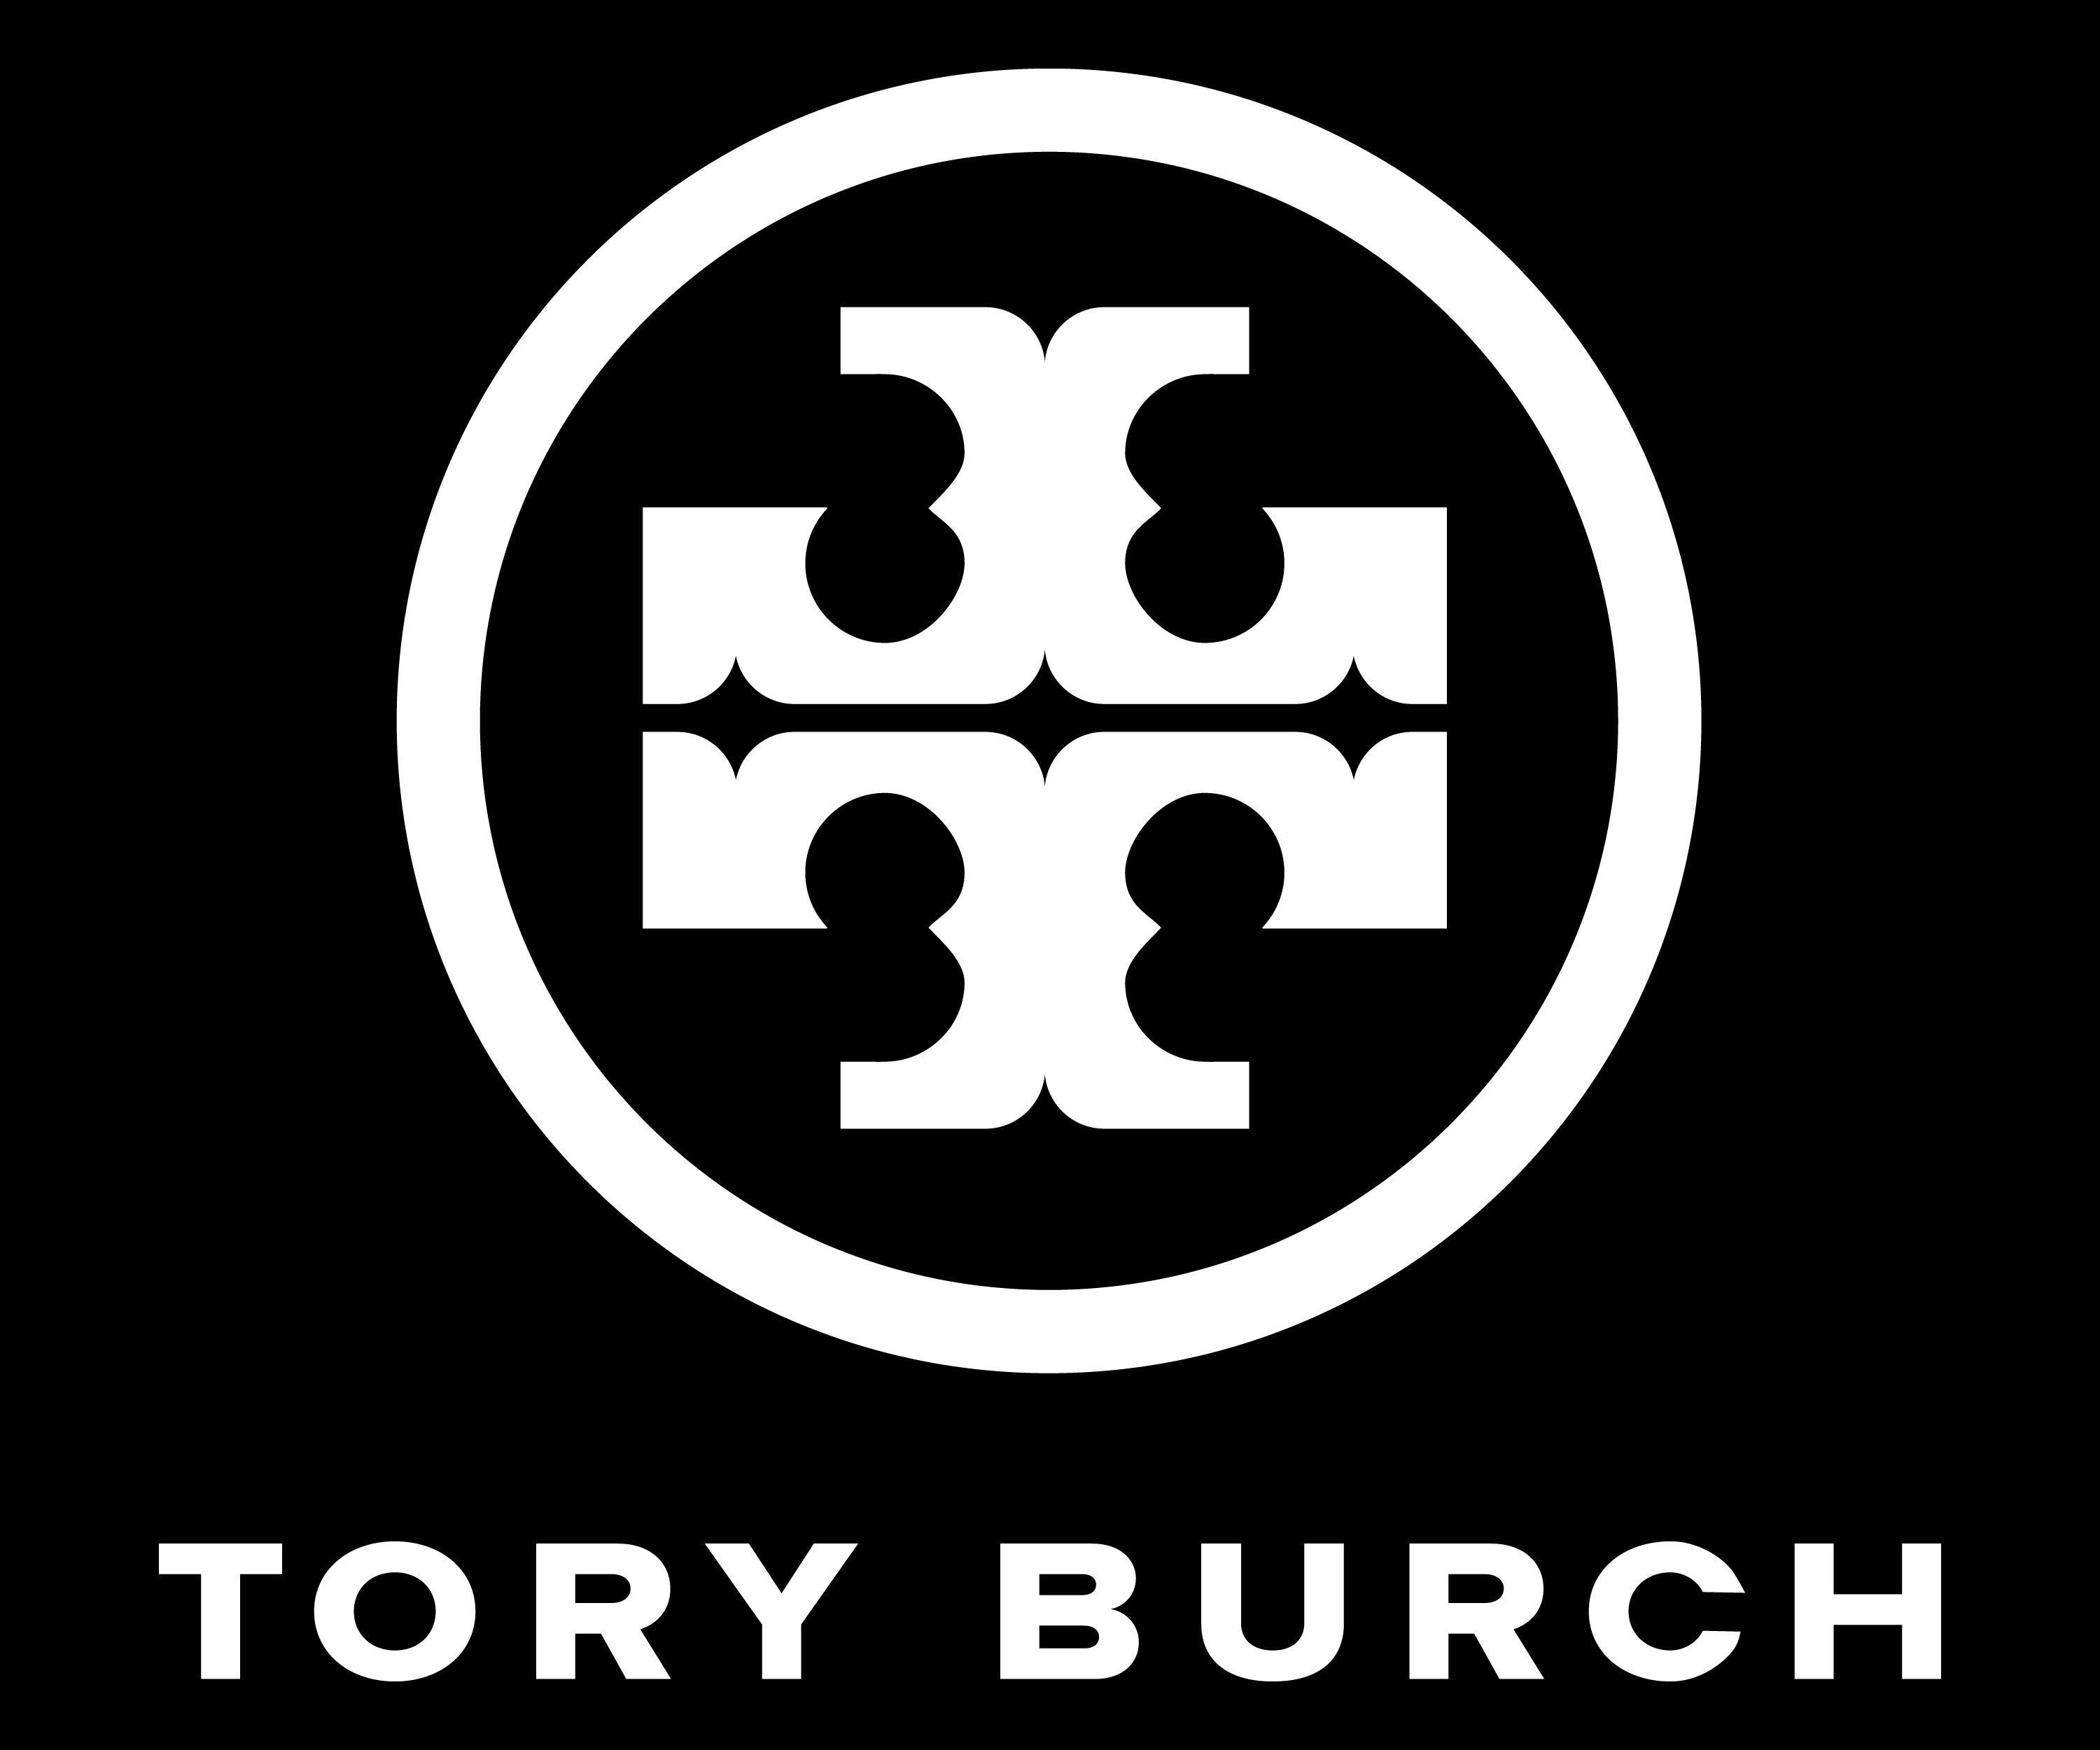 Tory Burch Black Logo - Tory Burch Logo, Tory Burch Symbol, Meaning, History and Evolution